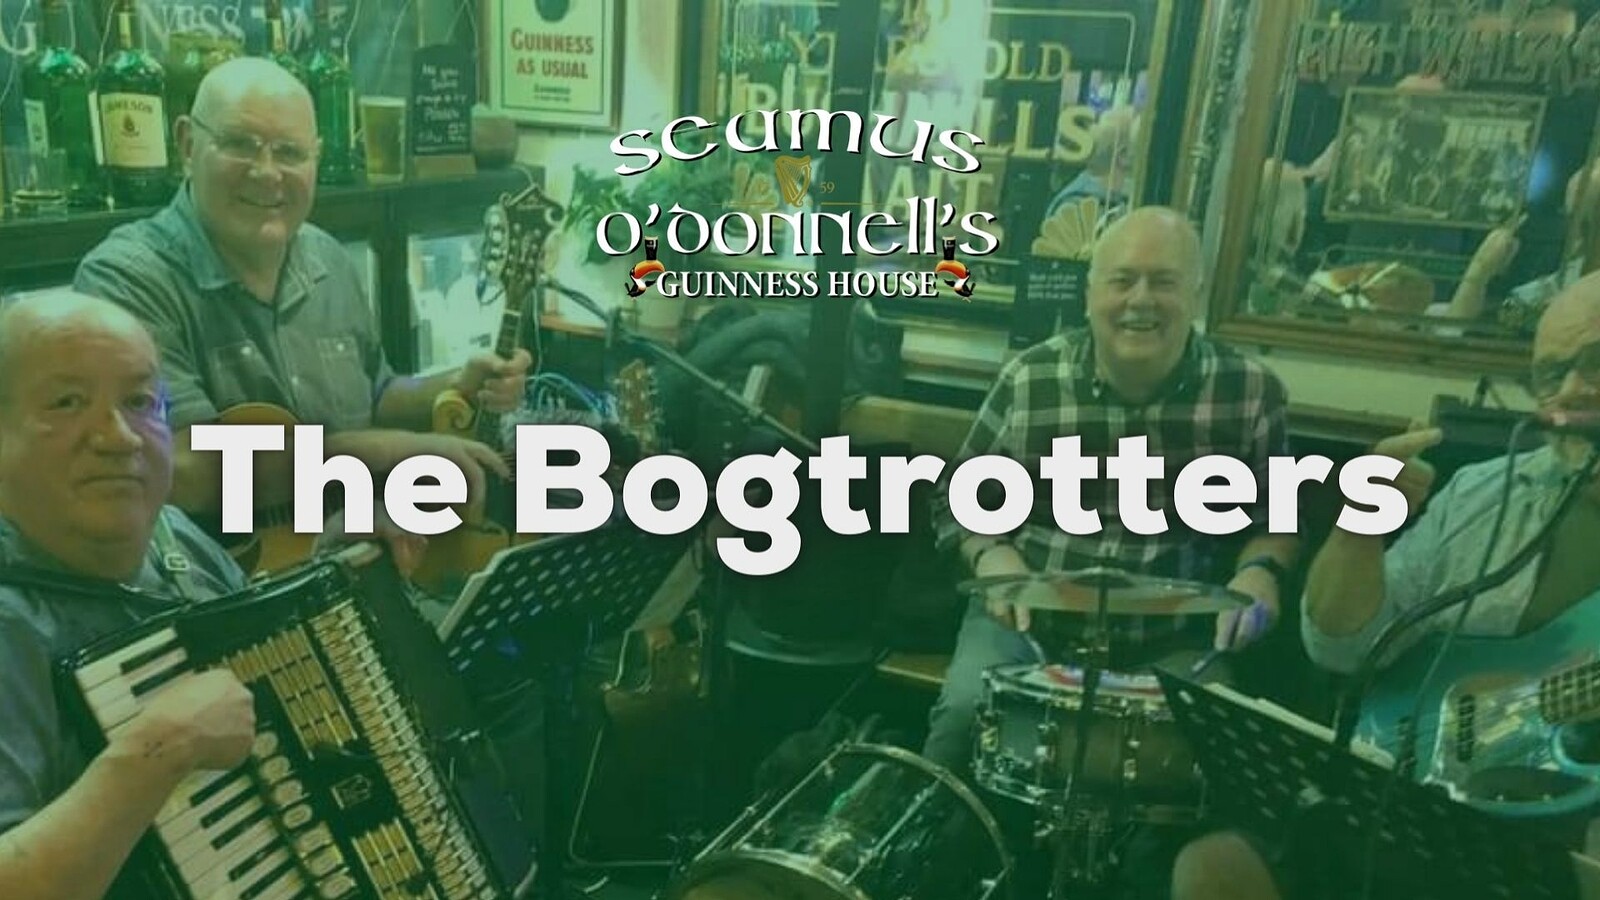 The Bogtrotters - St. Patricks Day at Seamus O'Donnell's